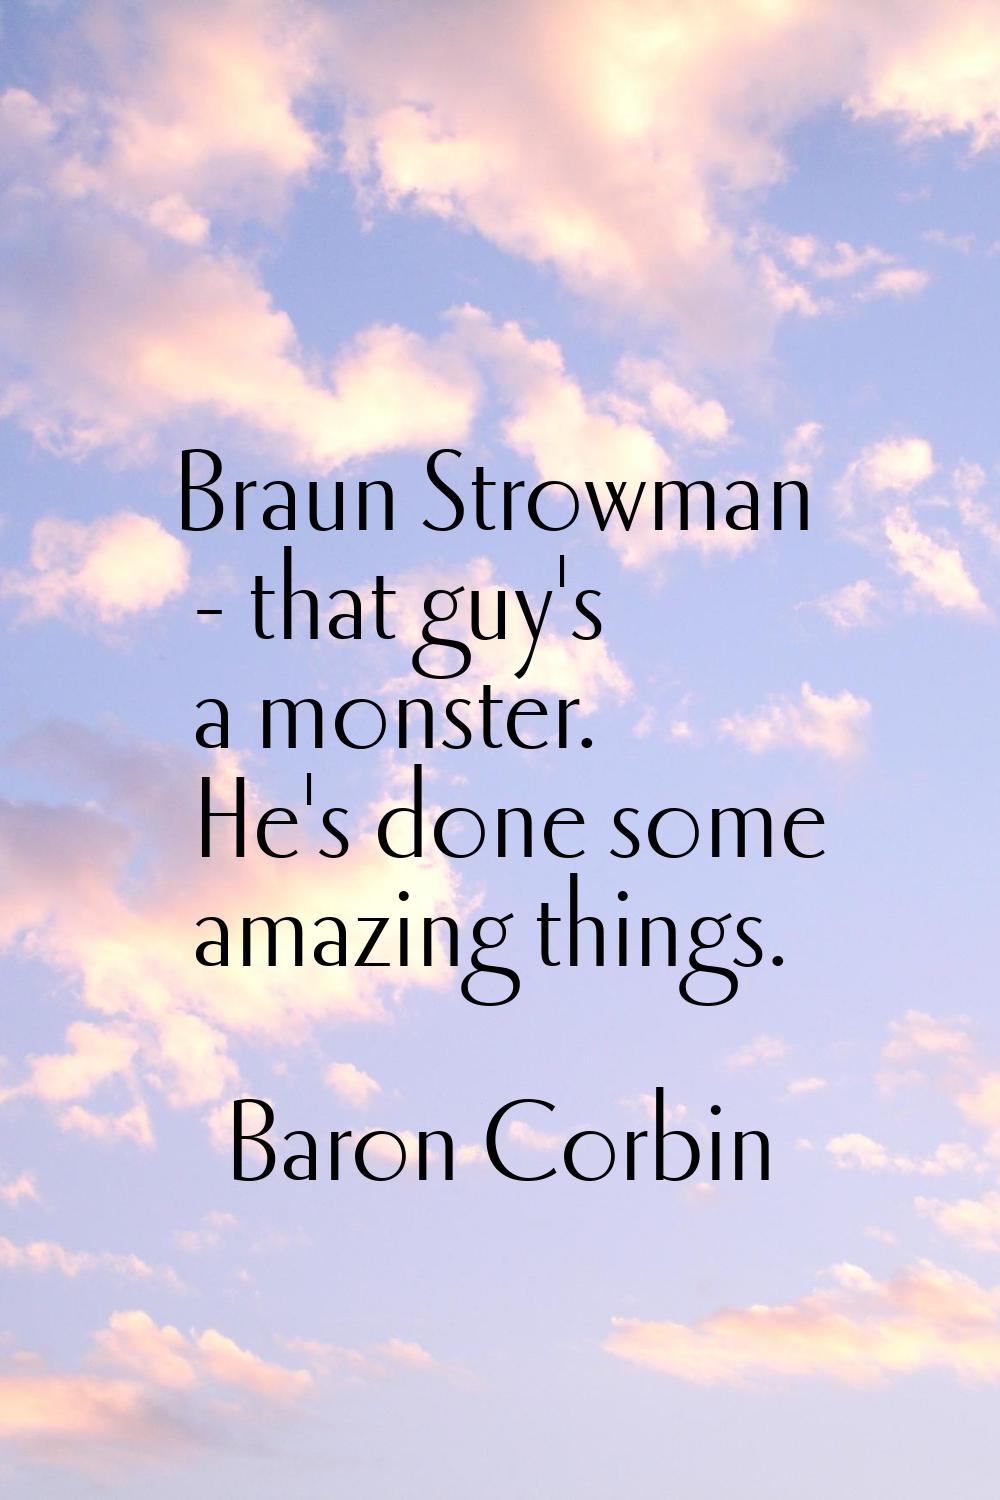 Braun Strowman - that guy's a monster. He's done some amazing things.